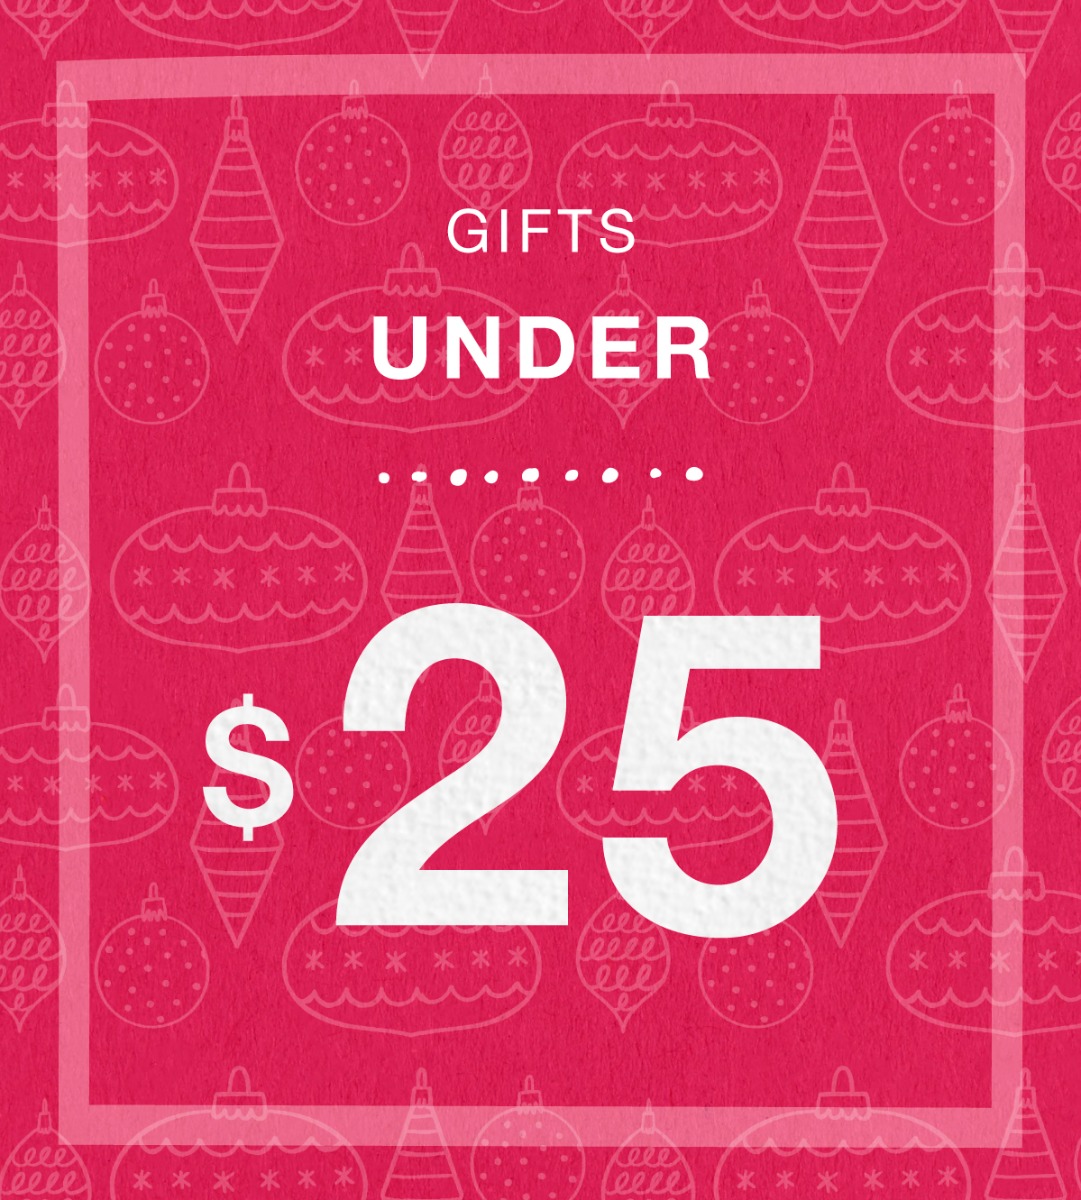 Gifts Under $25 dollars